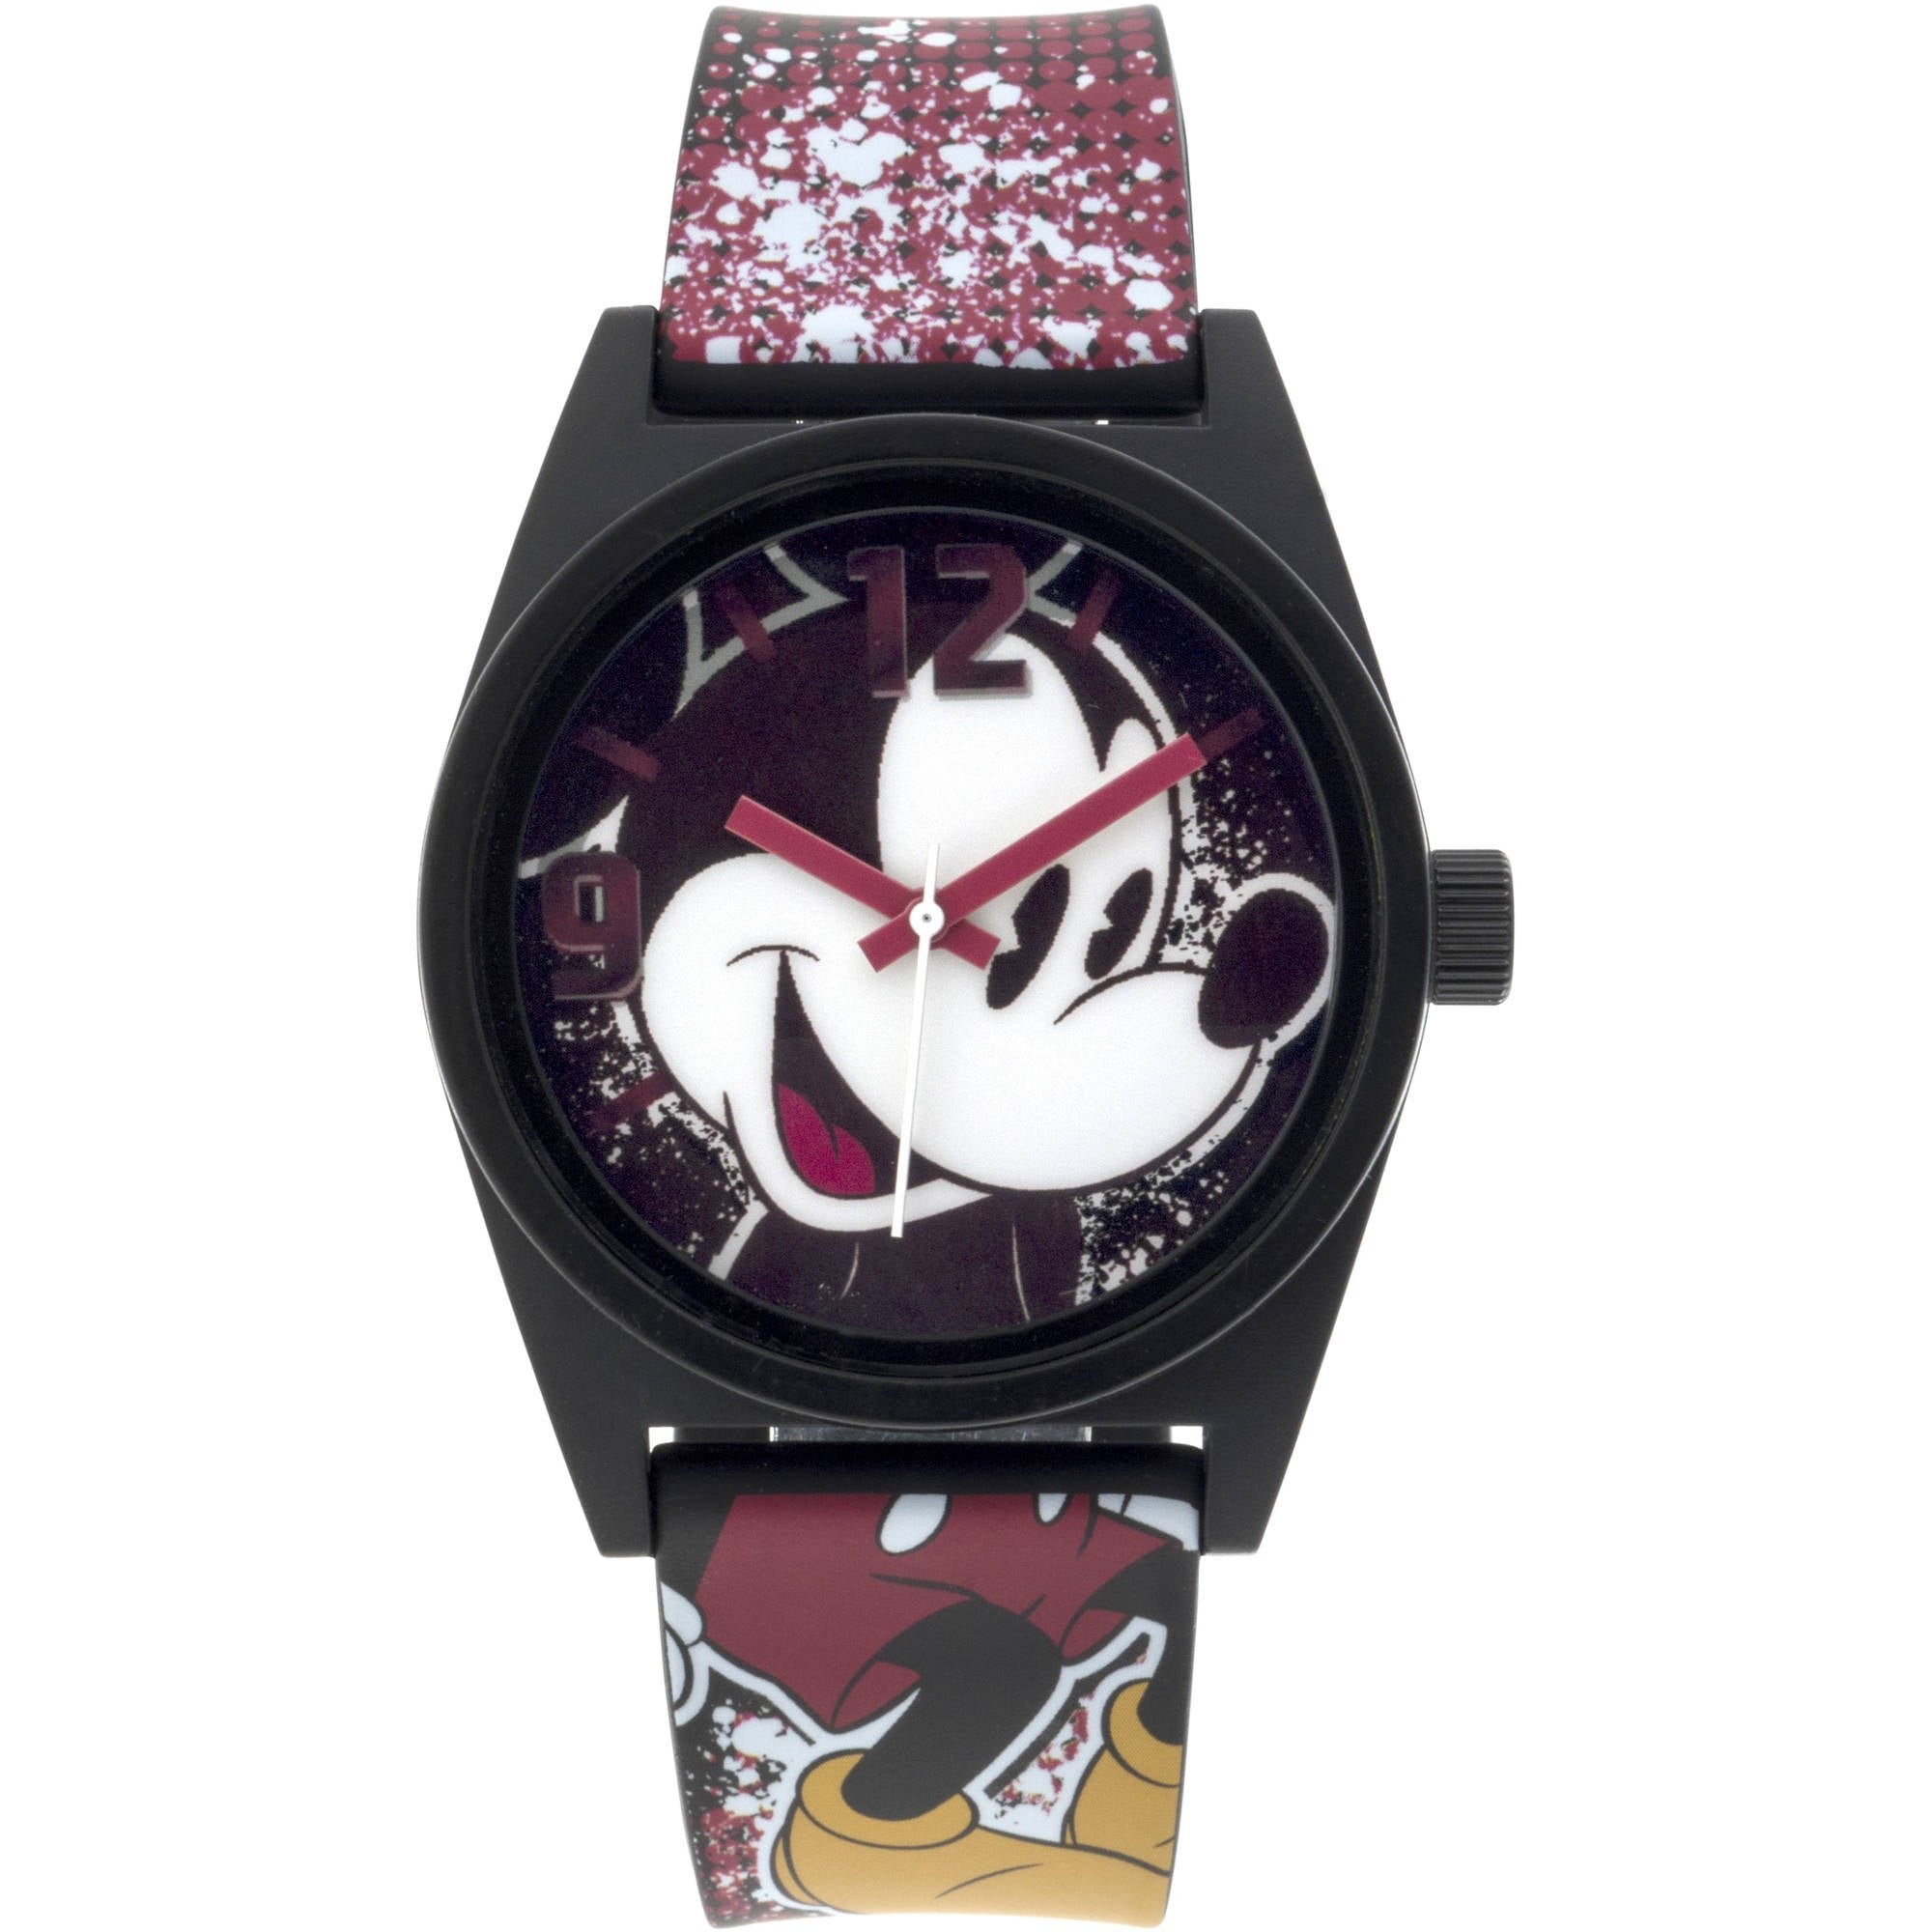 Model: Disney Mickey Mouse Watch with Printed Art Strap